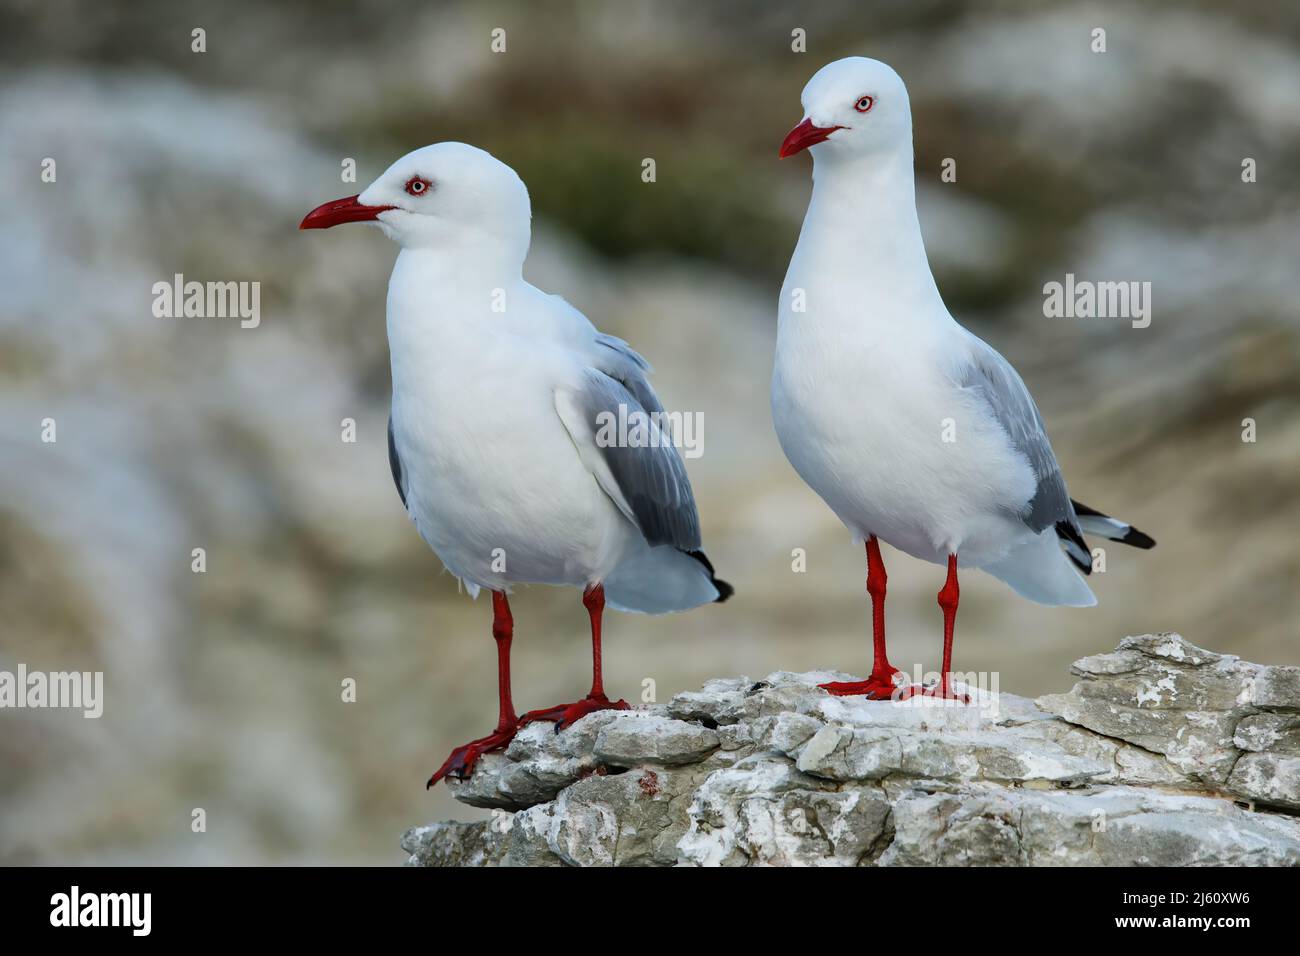 Red-billed gulls on the coast of Kaikoura peninsula, South Island, New Zealand. This bird is native to New Zealand. Stock Photo